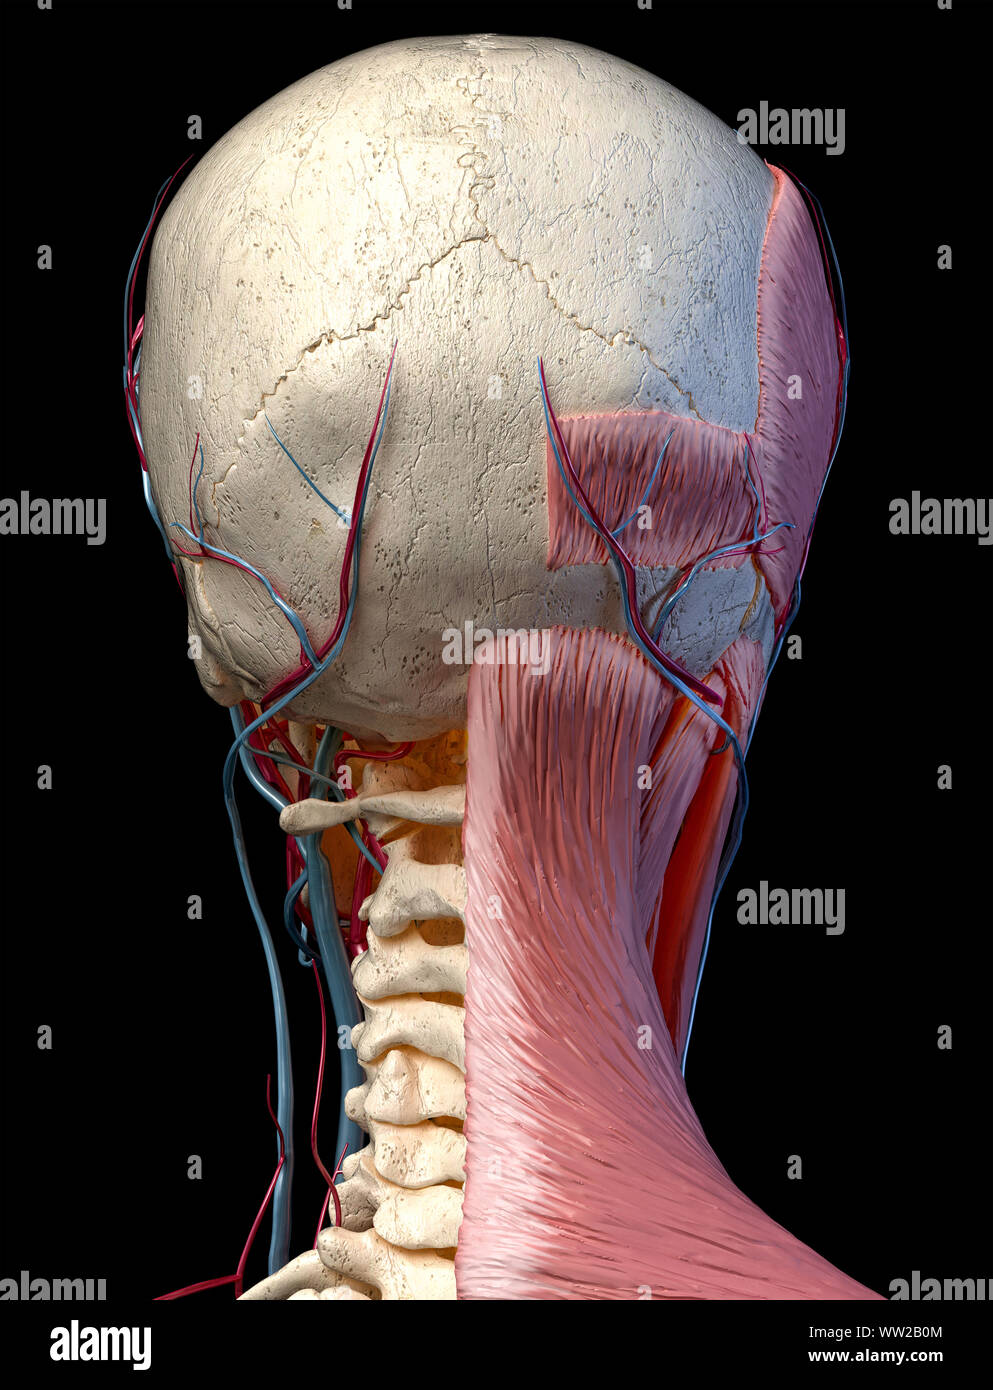 Human Anatomy 3d Illustration Of Head With Skull Blood Vessels And Muscles On Black Background Rear View Stock Photo Alamy